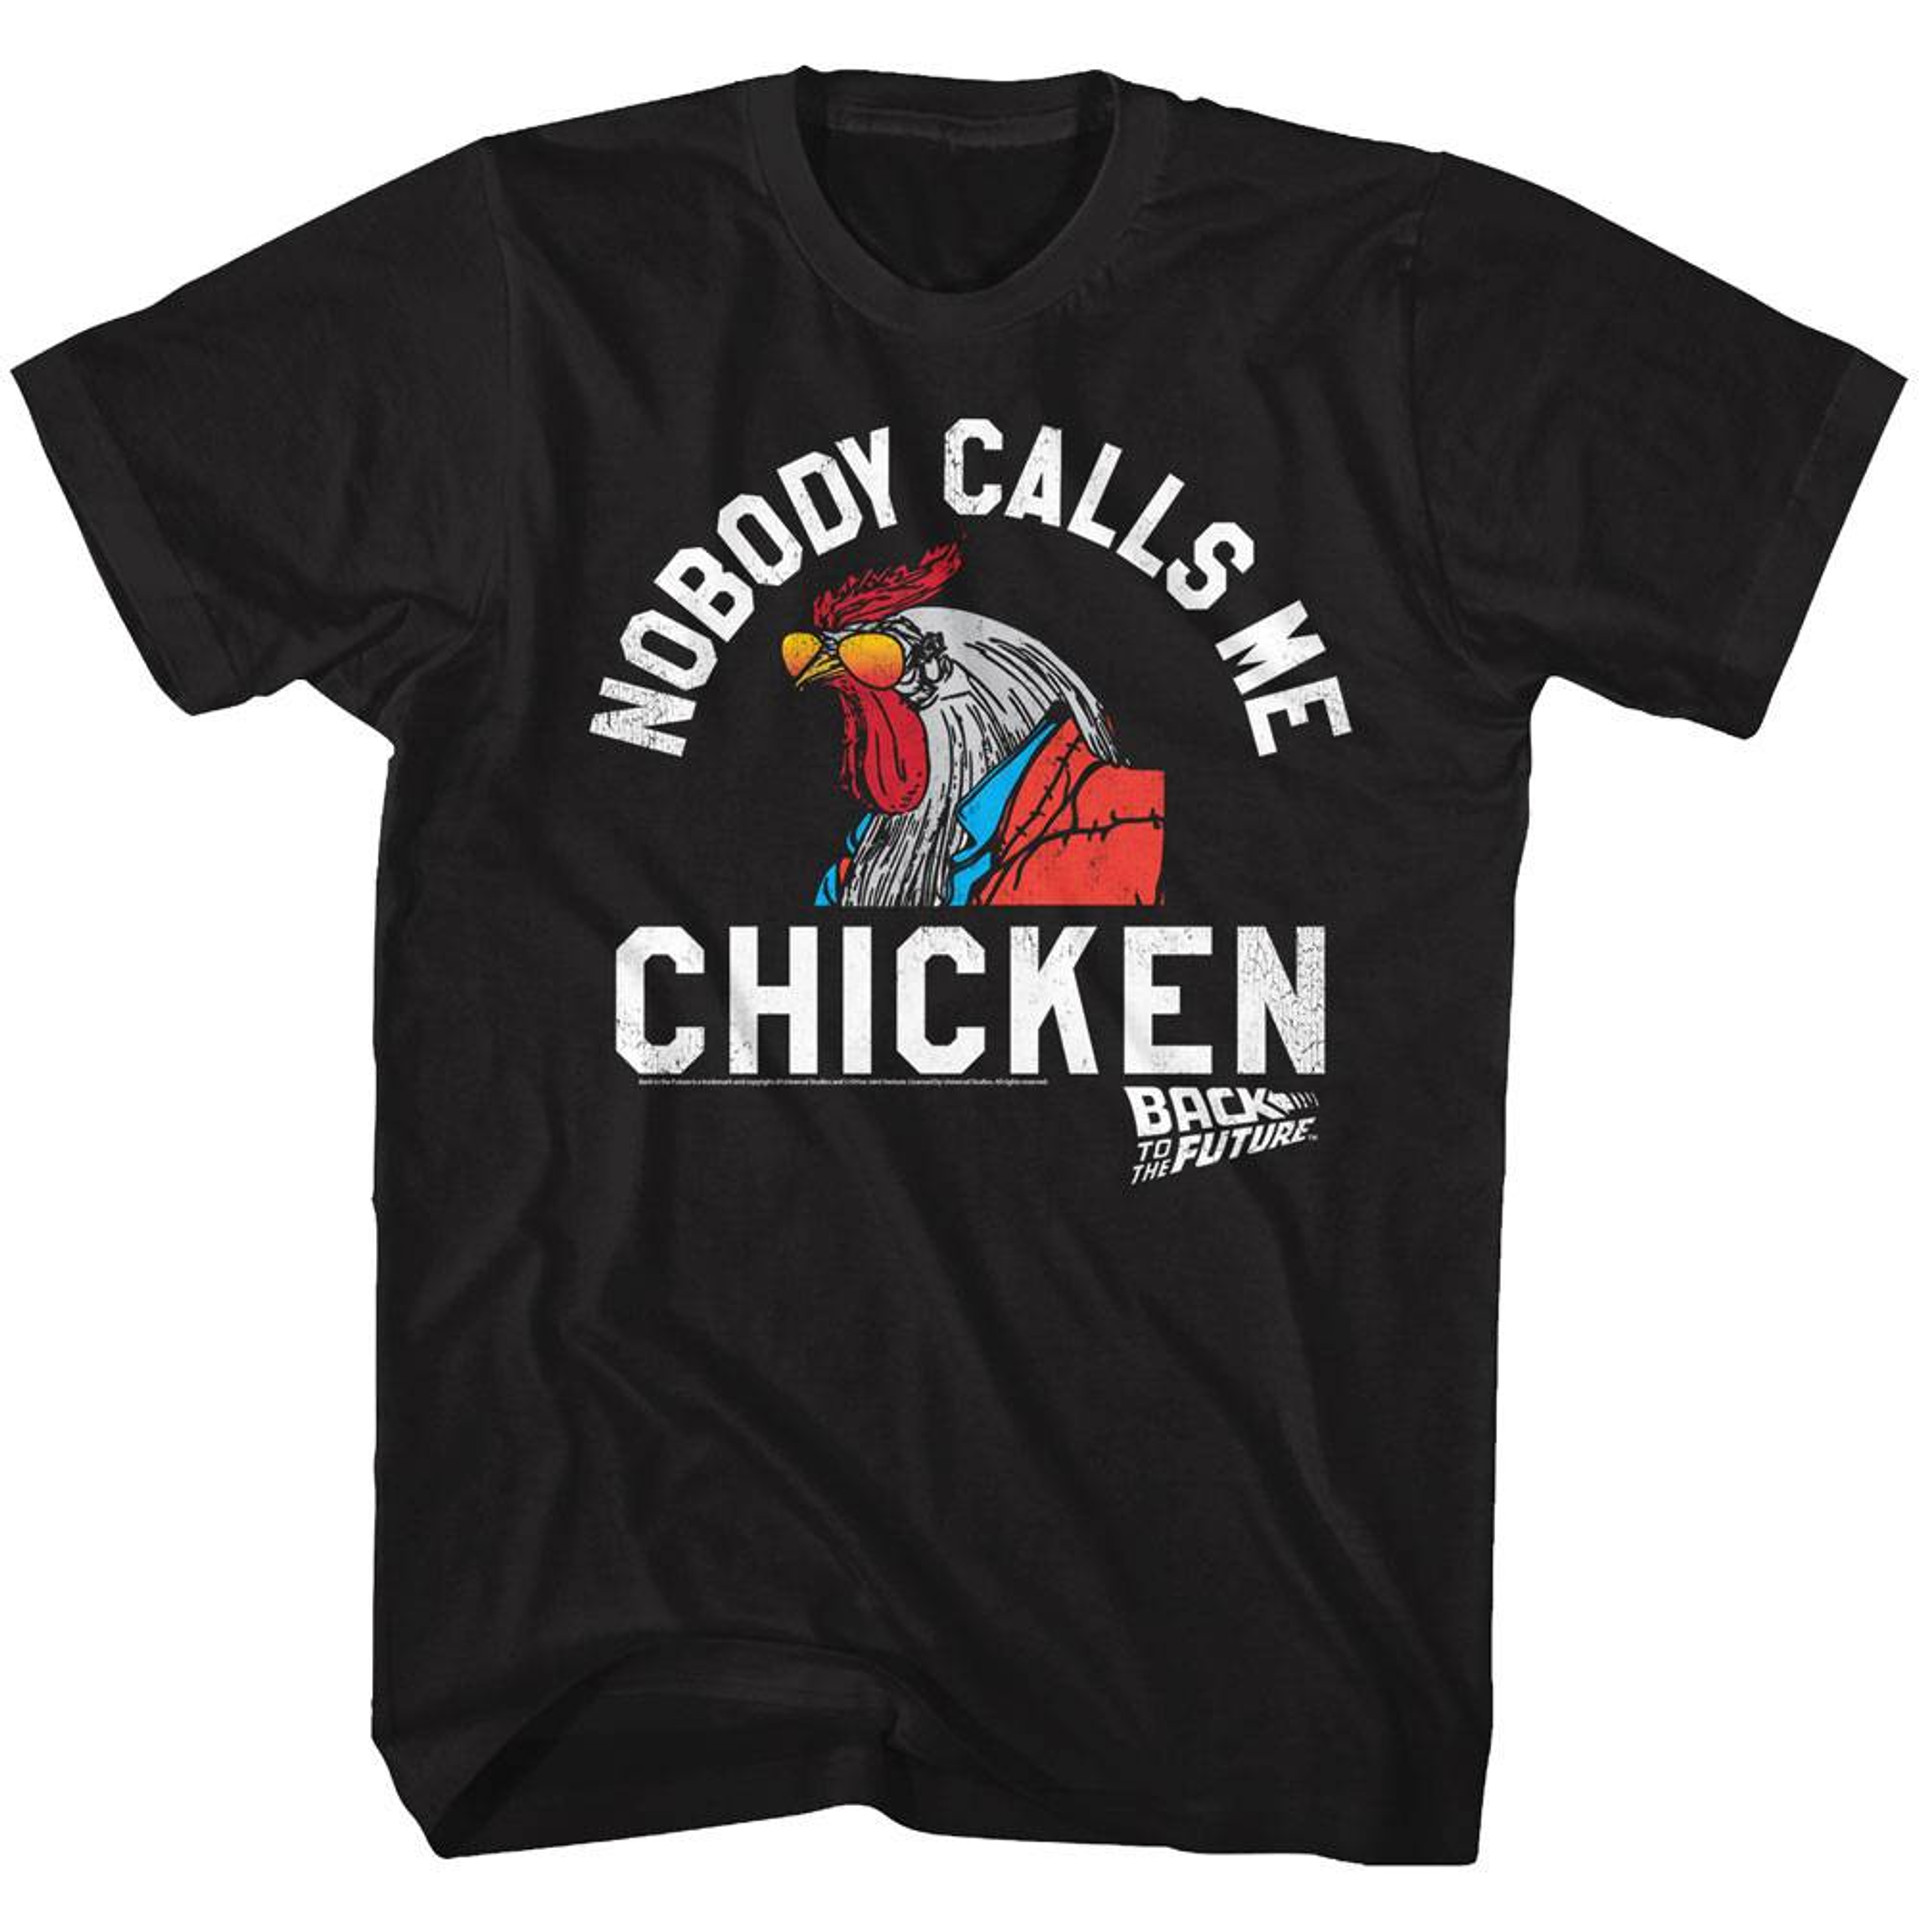 back to the future chicken adult t shirt 9604 7v3km